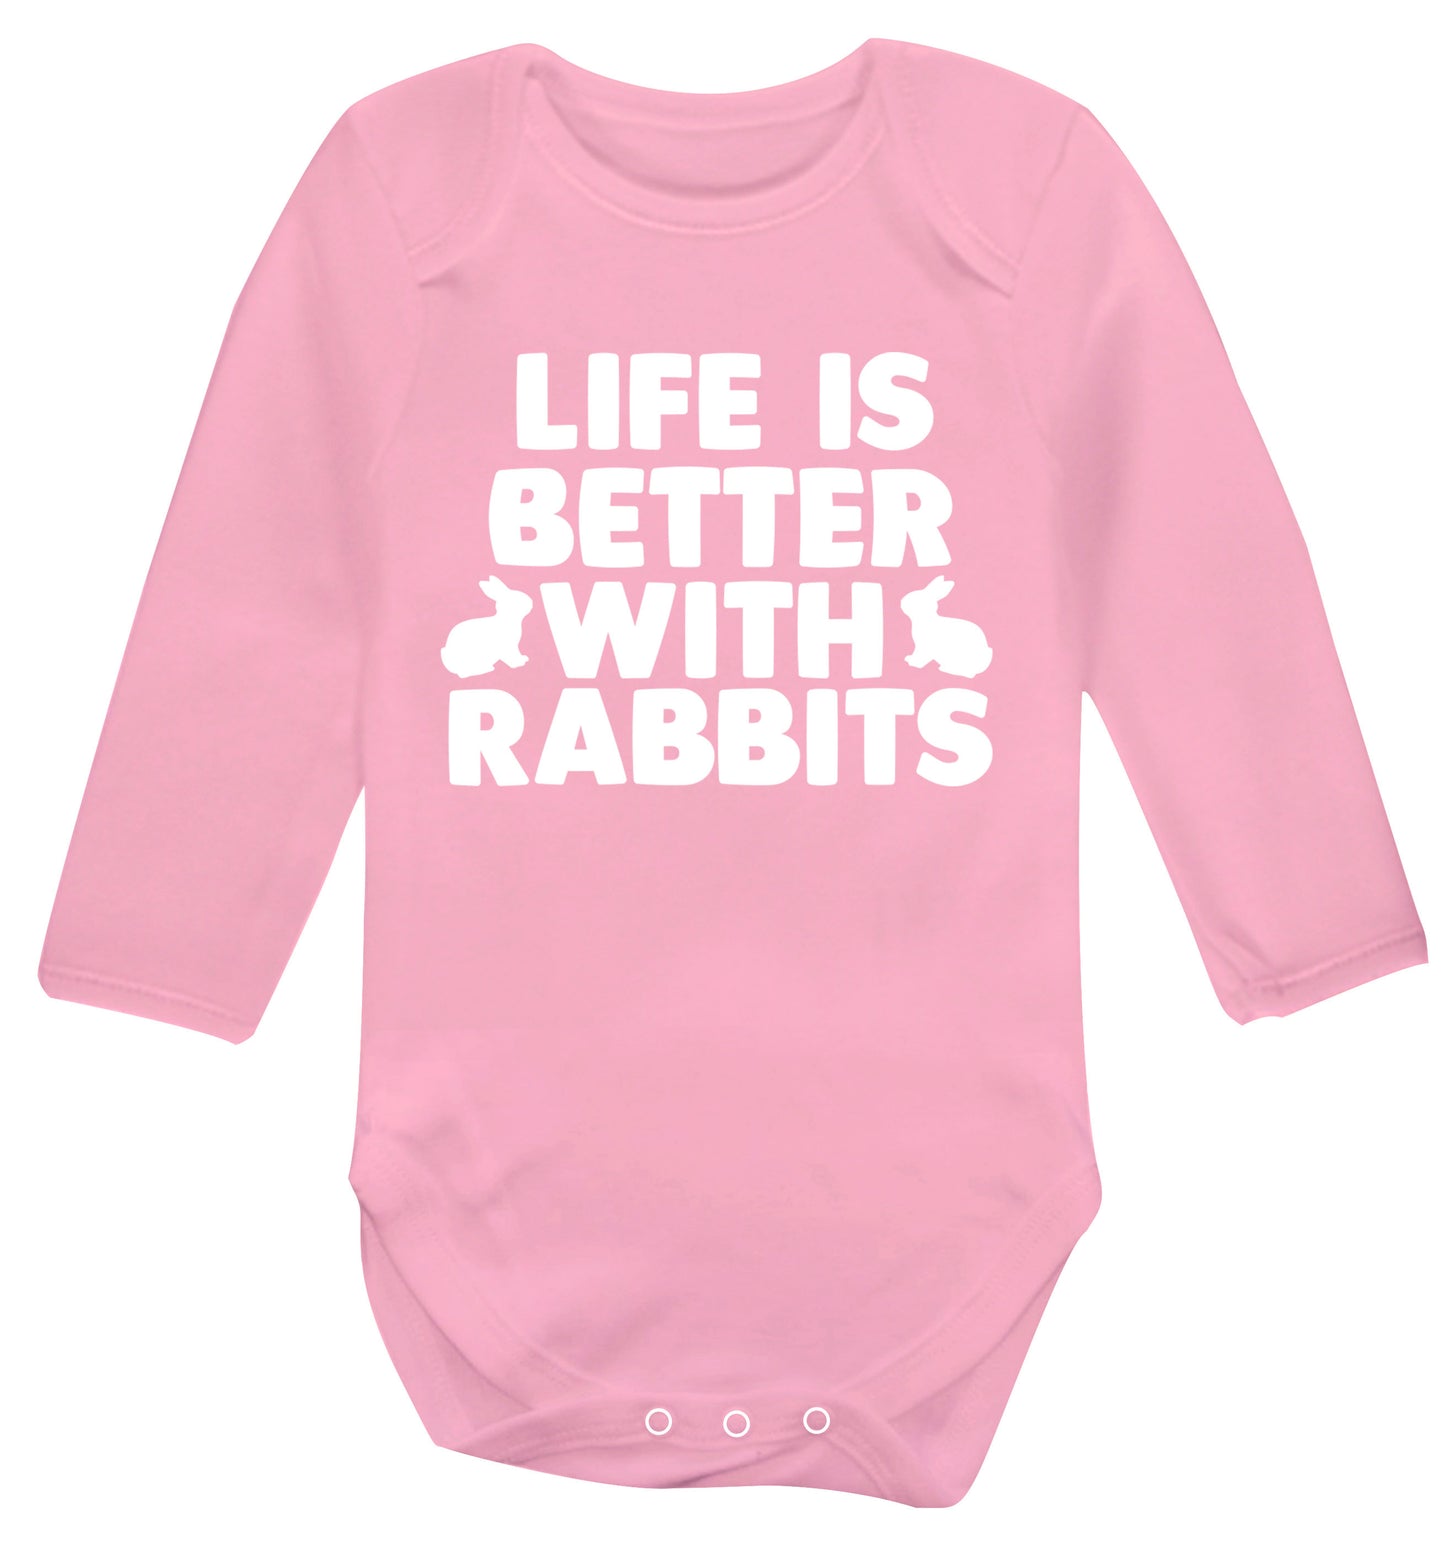 Life is better with rabbits Baby Vest long sleeved pale pink 6-12 months